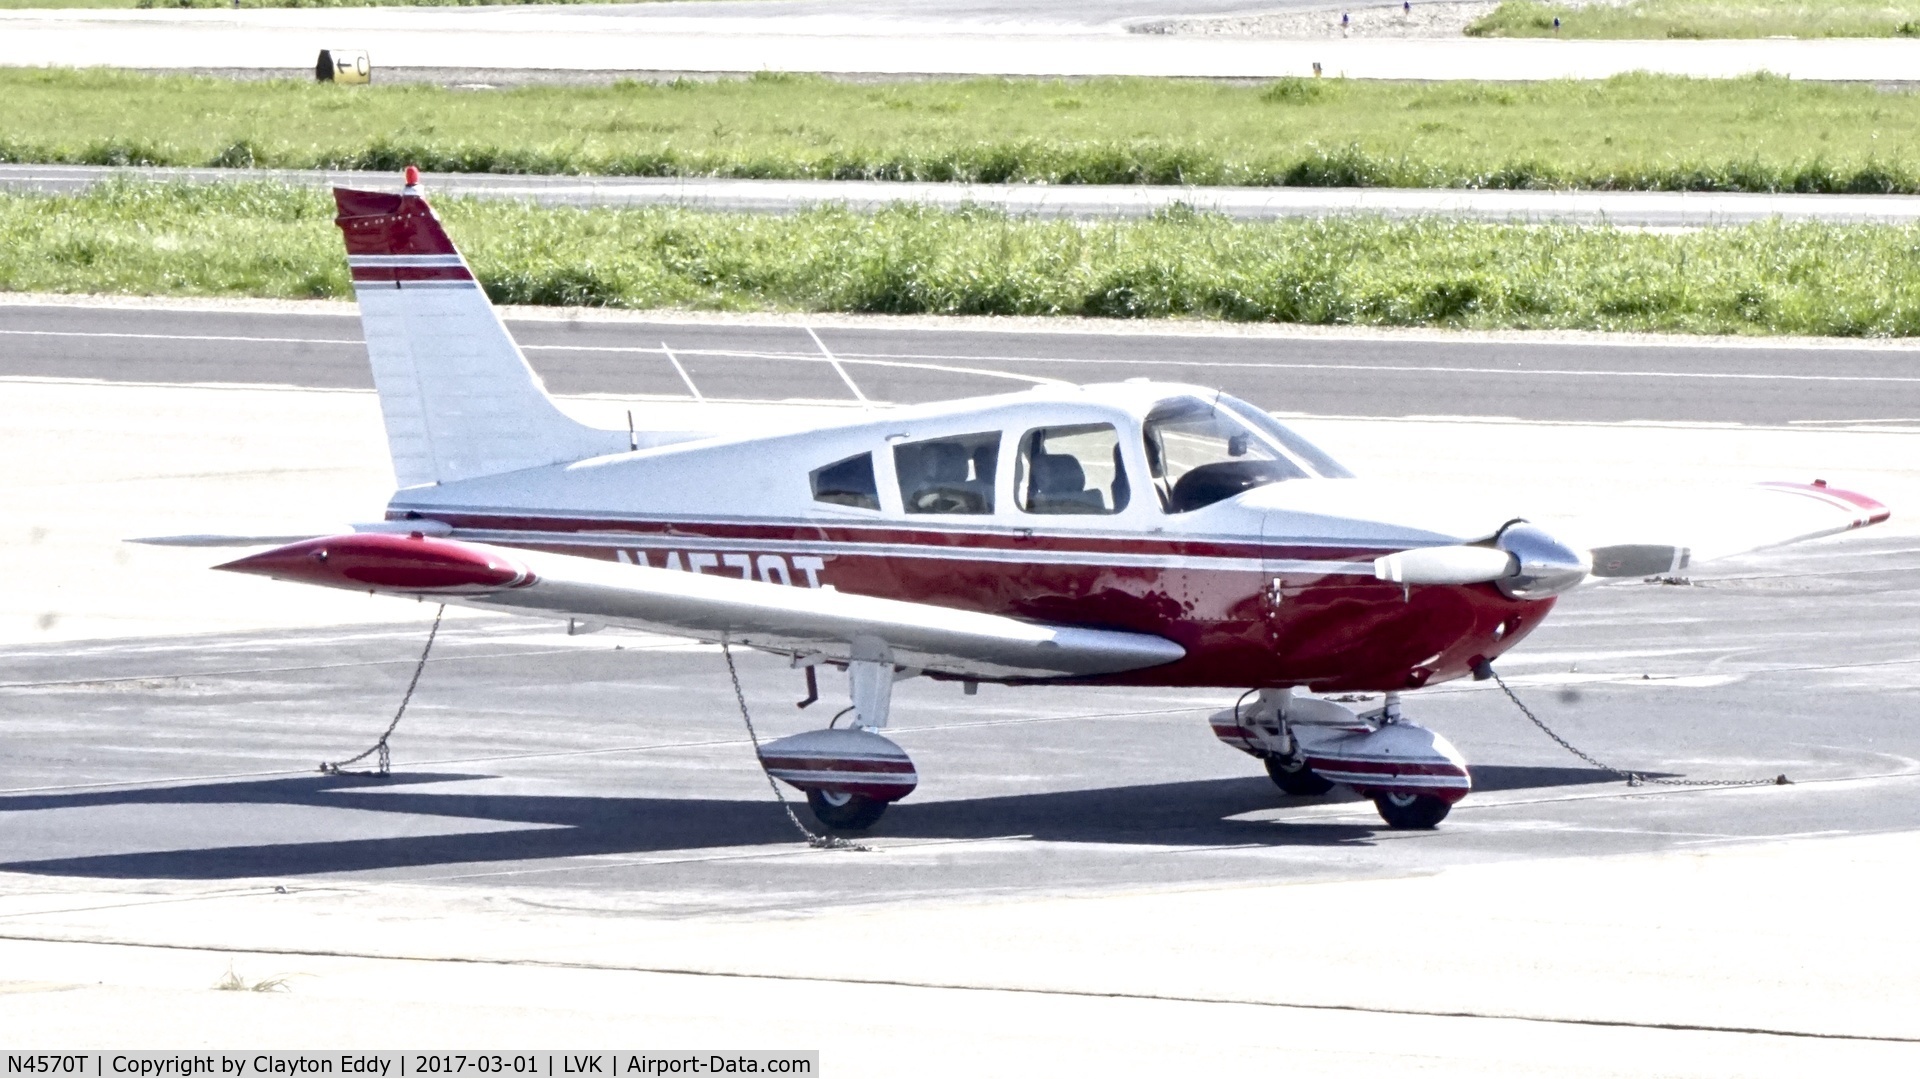 N4570T, 1972 Piper PA-28-235 C/N 28-7210013, Livermore Airport 2017